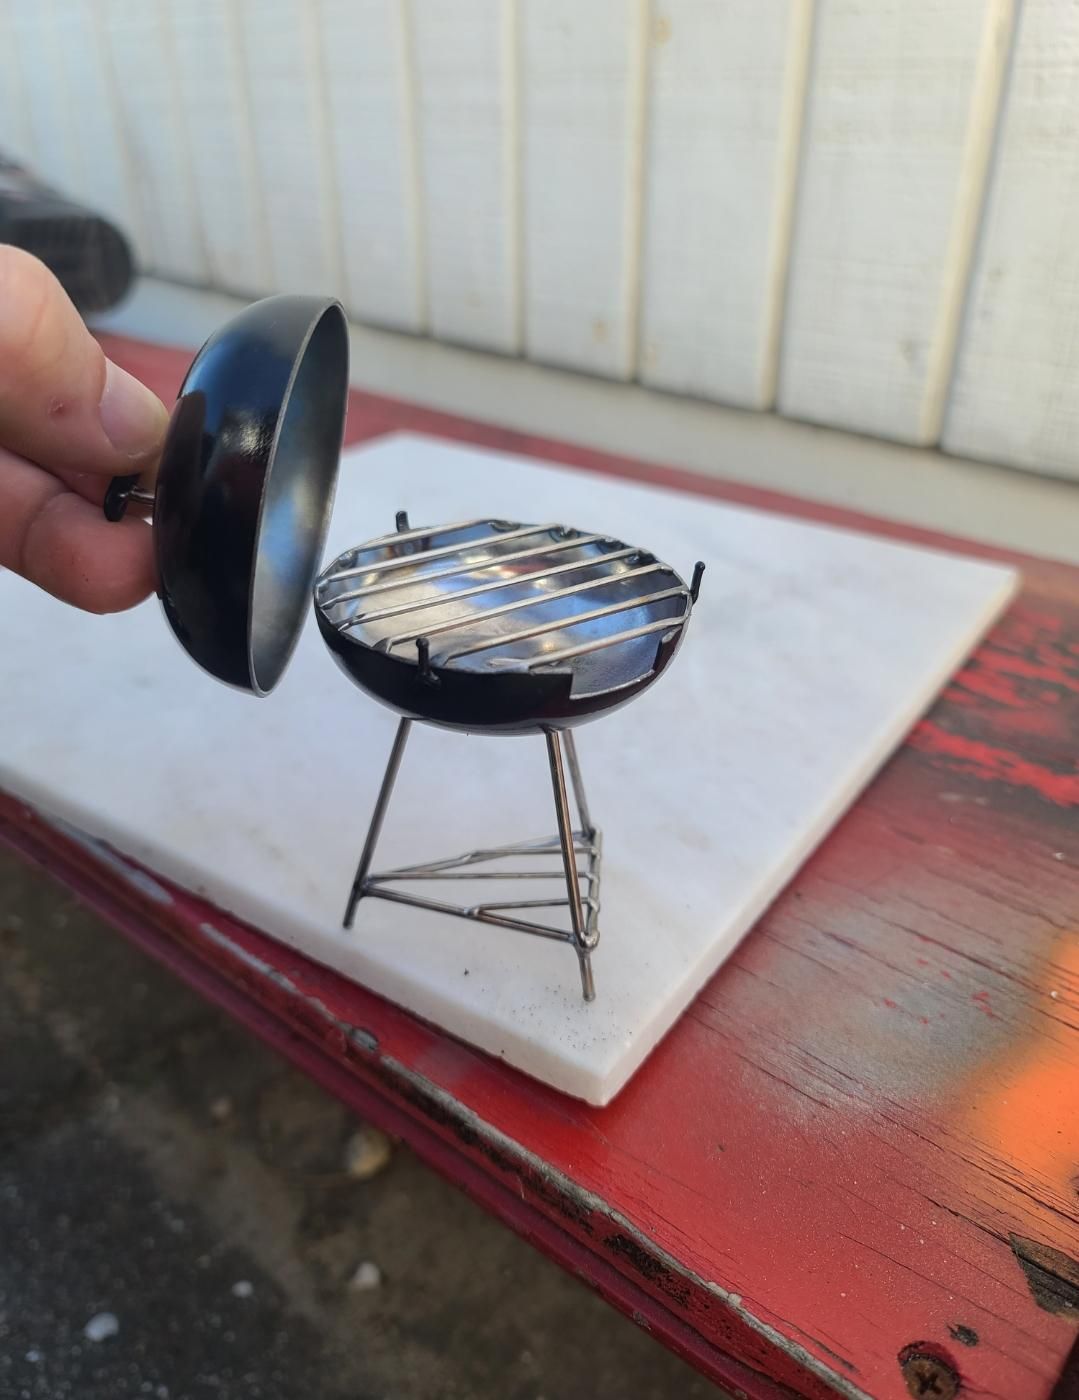 Converted a Bike Bell into a Tiny Grill. Who Wants Baby Bike Ribs?